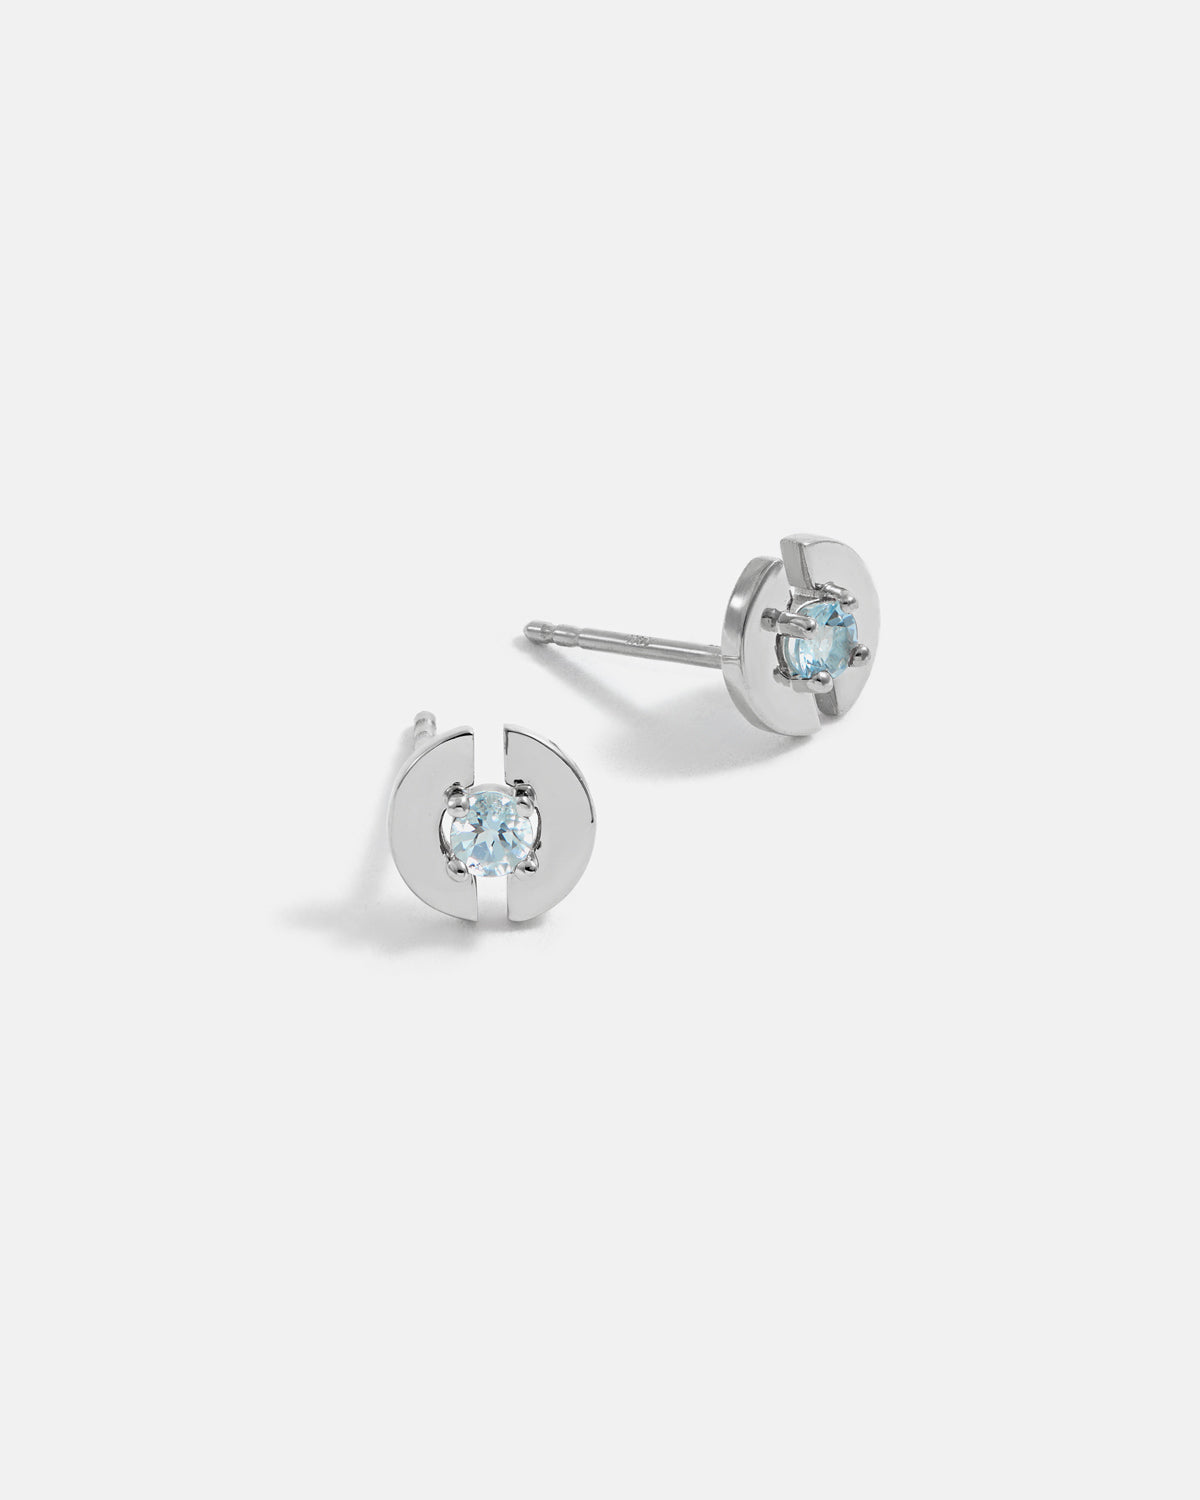 Stein Stud Earrings in Silver with Aquamarine